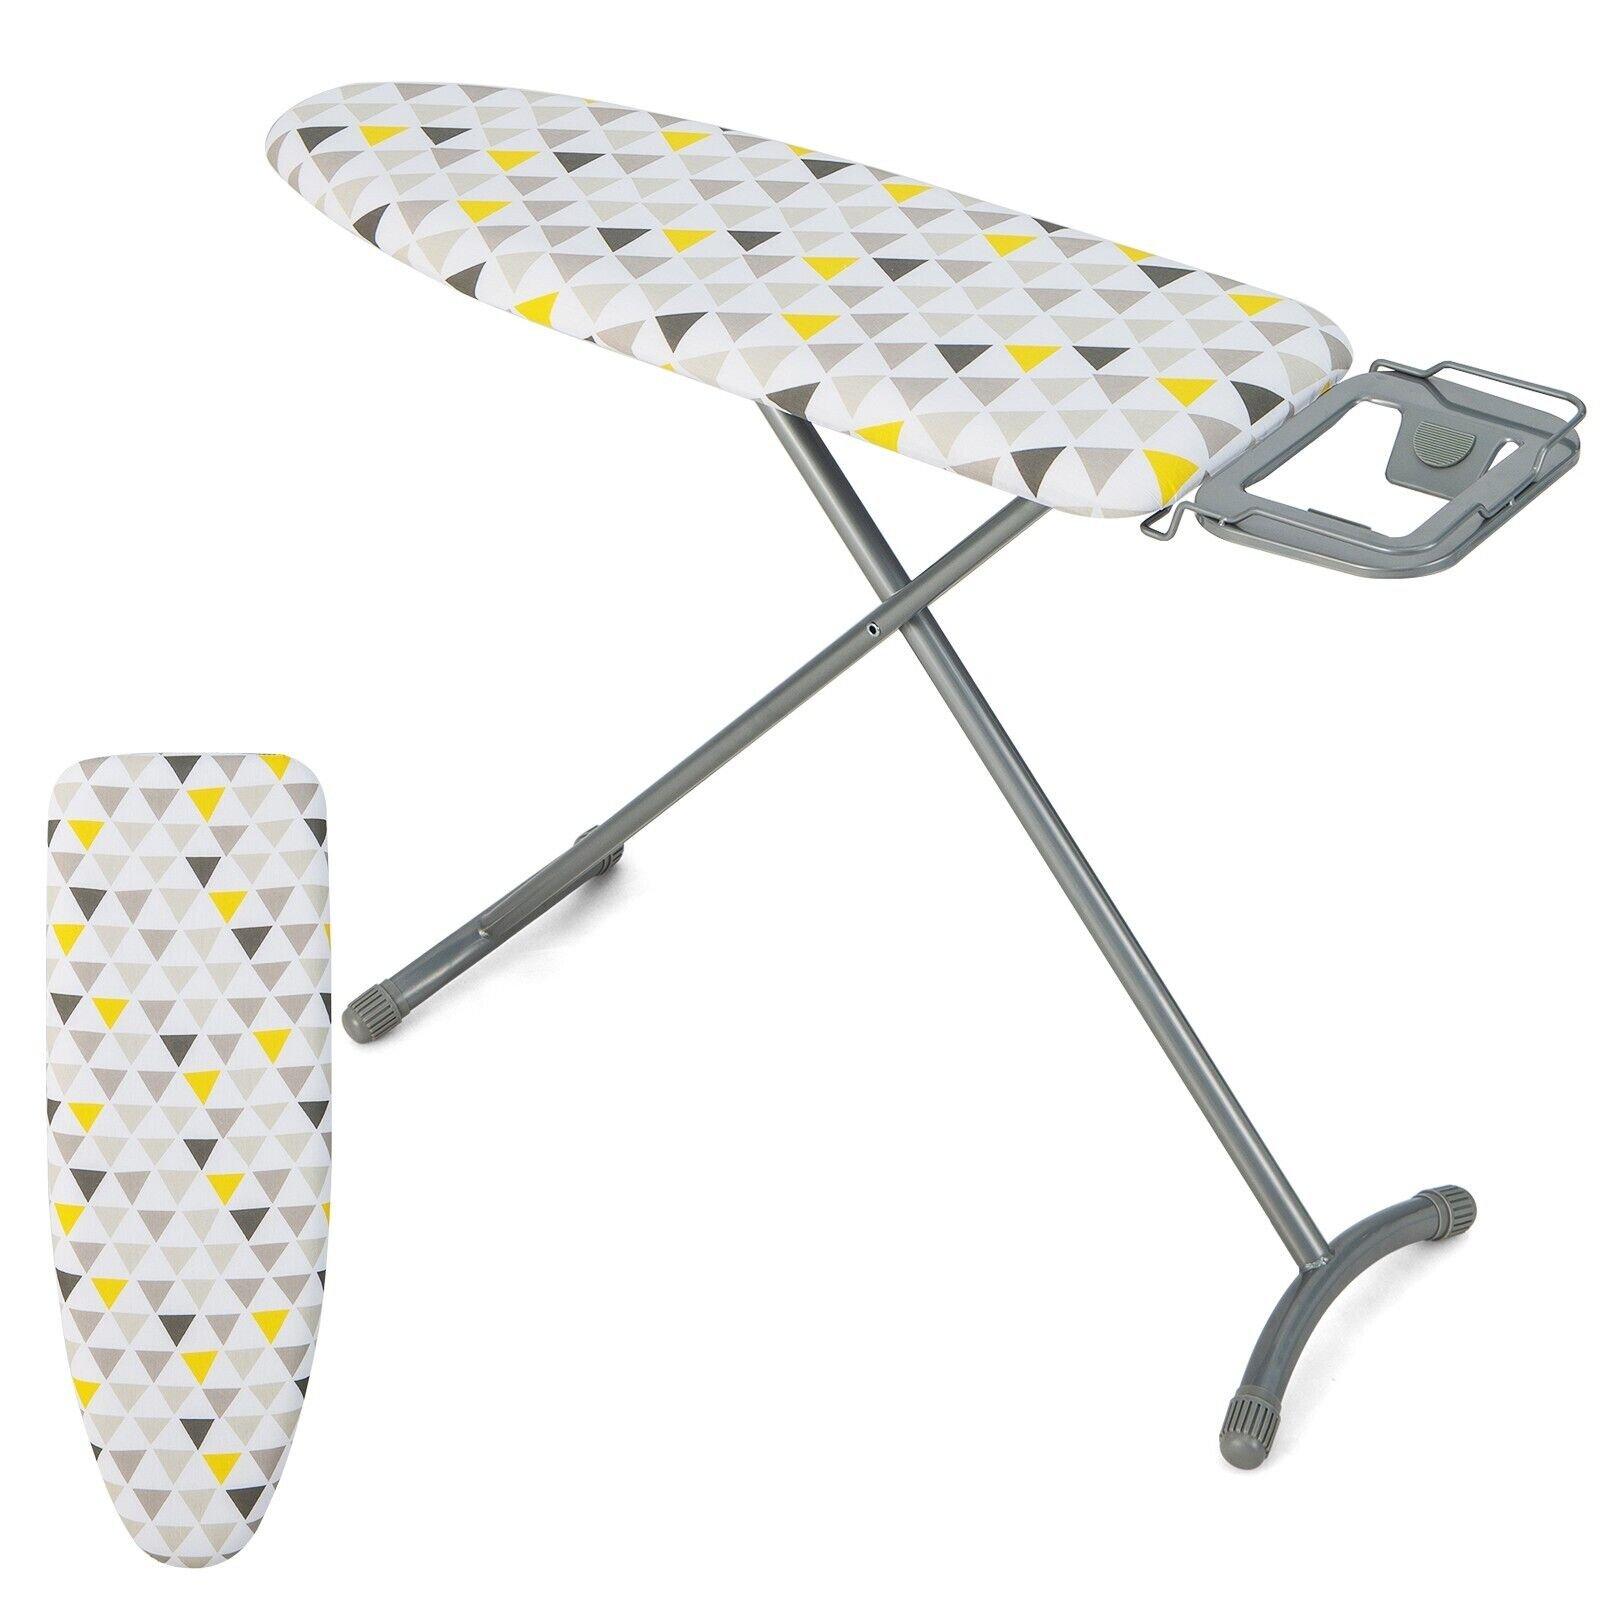 Foldable Ironing Board Height Adjustable Iron Table w/ Extra Cover